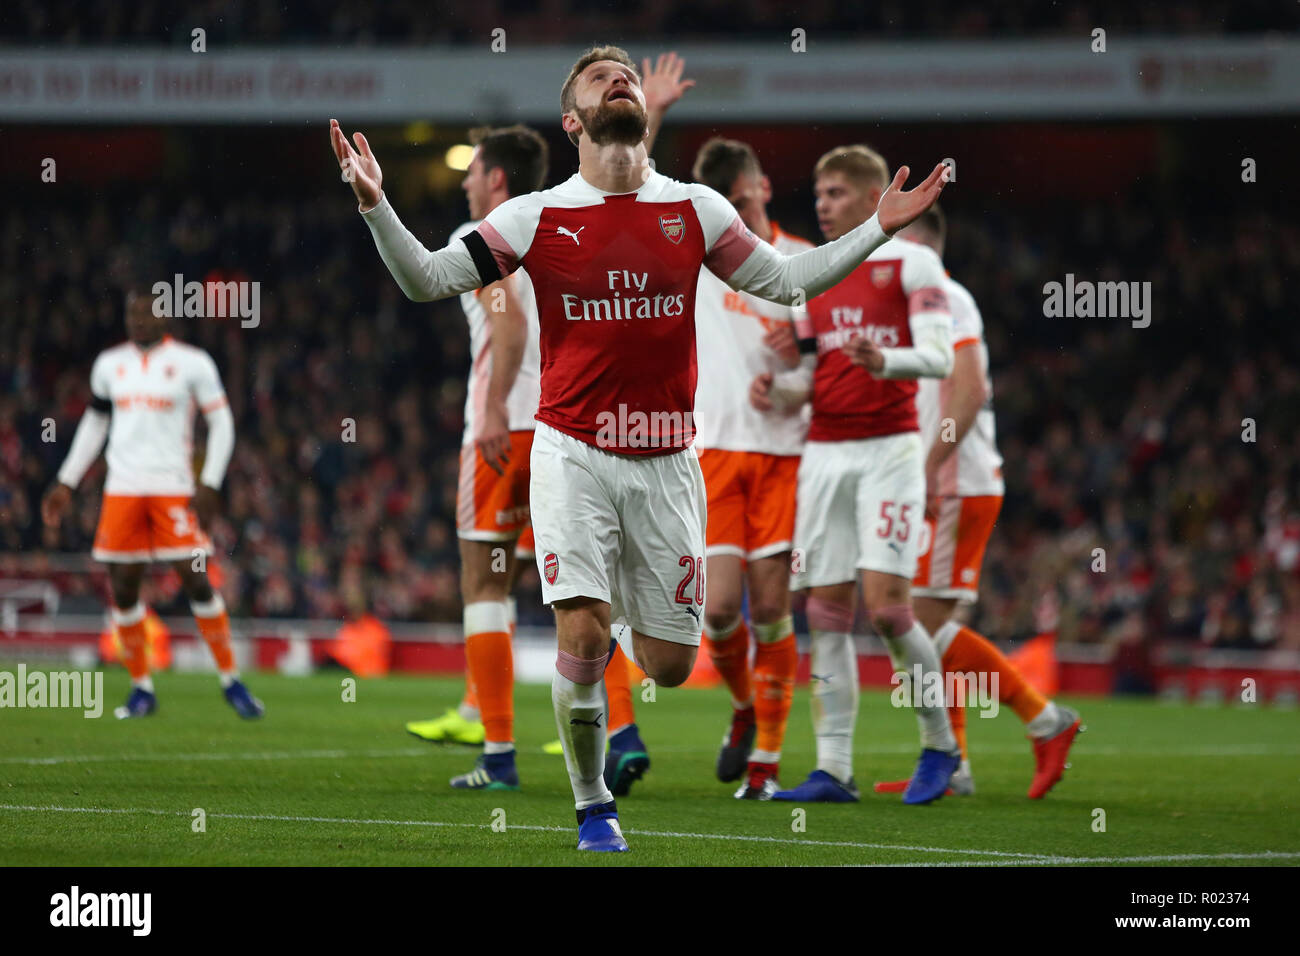 London, UK. 31st Oct, 2018. Shkodran Mustafi of Arsenal reacts after a missed chance - Arsenal v Blackpool, Carabao Cup - Fourth Round, Emirates Stadium, London (Holloway) - 31st October 2018  STRICTLY EDITORIAL USE ONLY - DataCo rules apply - The use of this image in a commercial context is strictly prohibited unless express permission has been given by the club(s) concerned. Examples of commercial usage include, but are not limited to, use in betting and gaming, marketing and advertising products. No use with unauthorised audio, video, data, fixture lists, club and or league logos or service Stock Photo